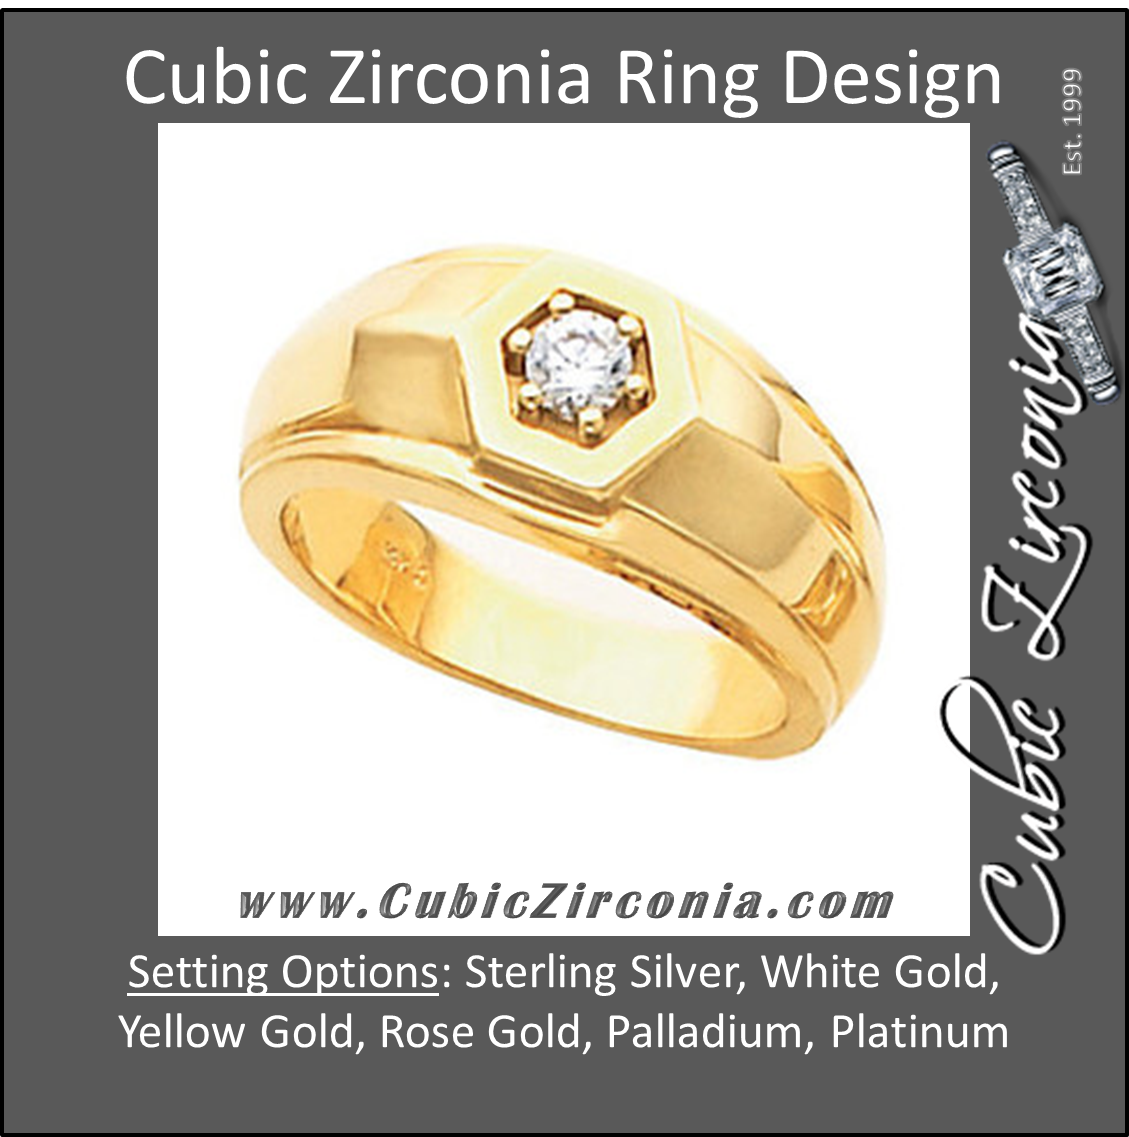 Cubic Zirconia Men's Wedding Band – The Benny Binion Ring (0.5 TCW Solitaire)